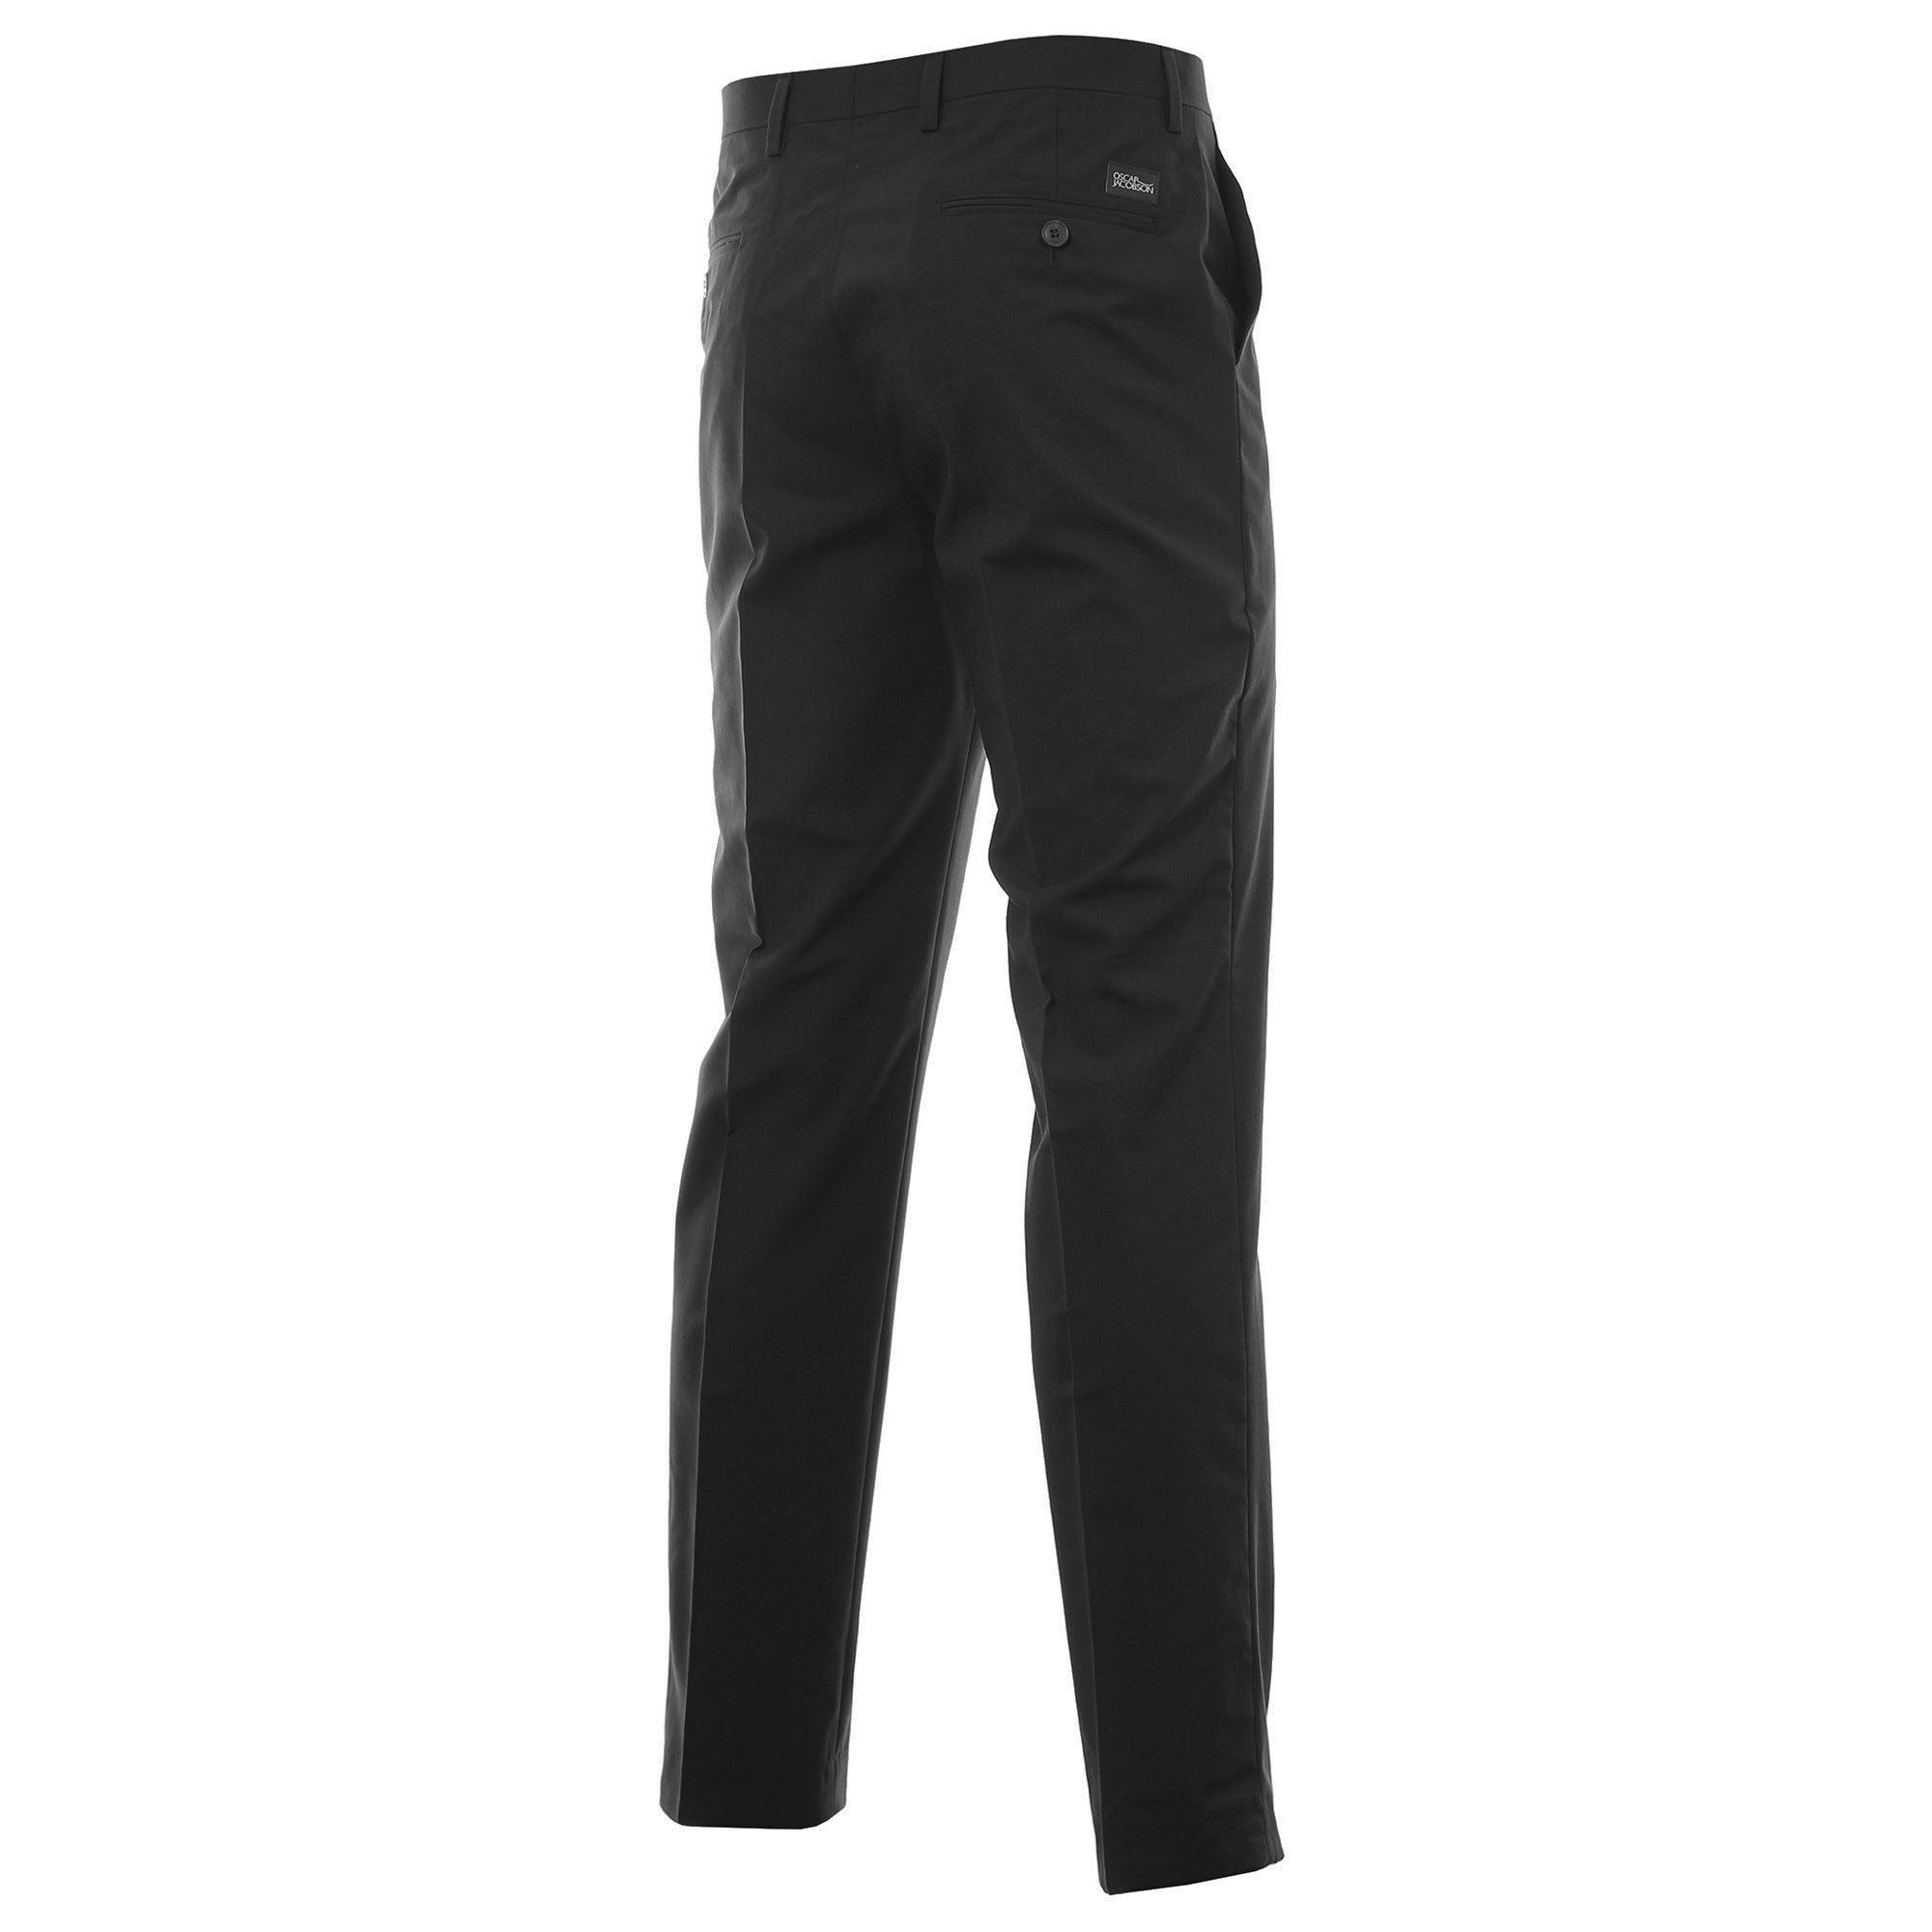 Oscar Jacobson Dave Trousers OJTRS0001 Black | Function18 | Restrictedgs